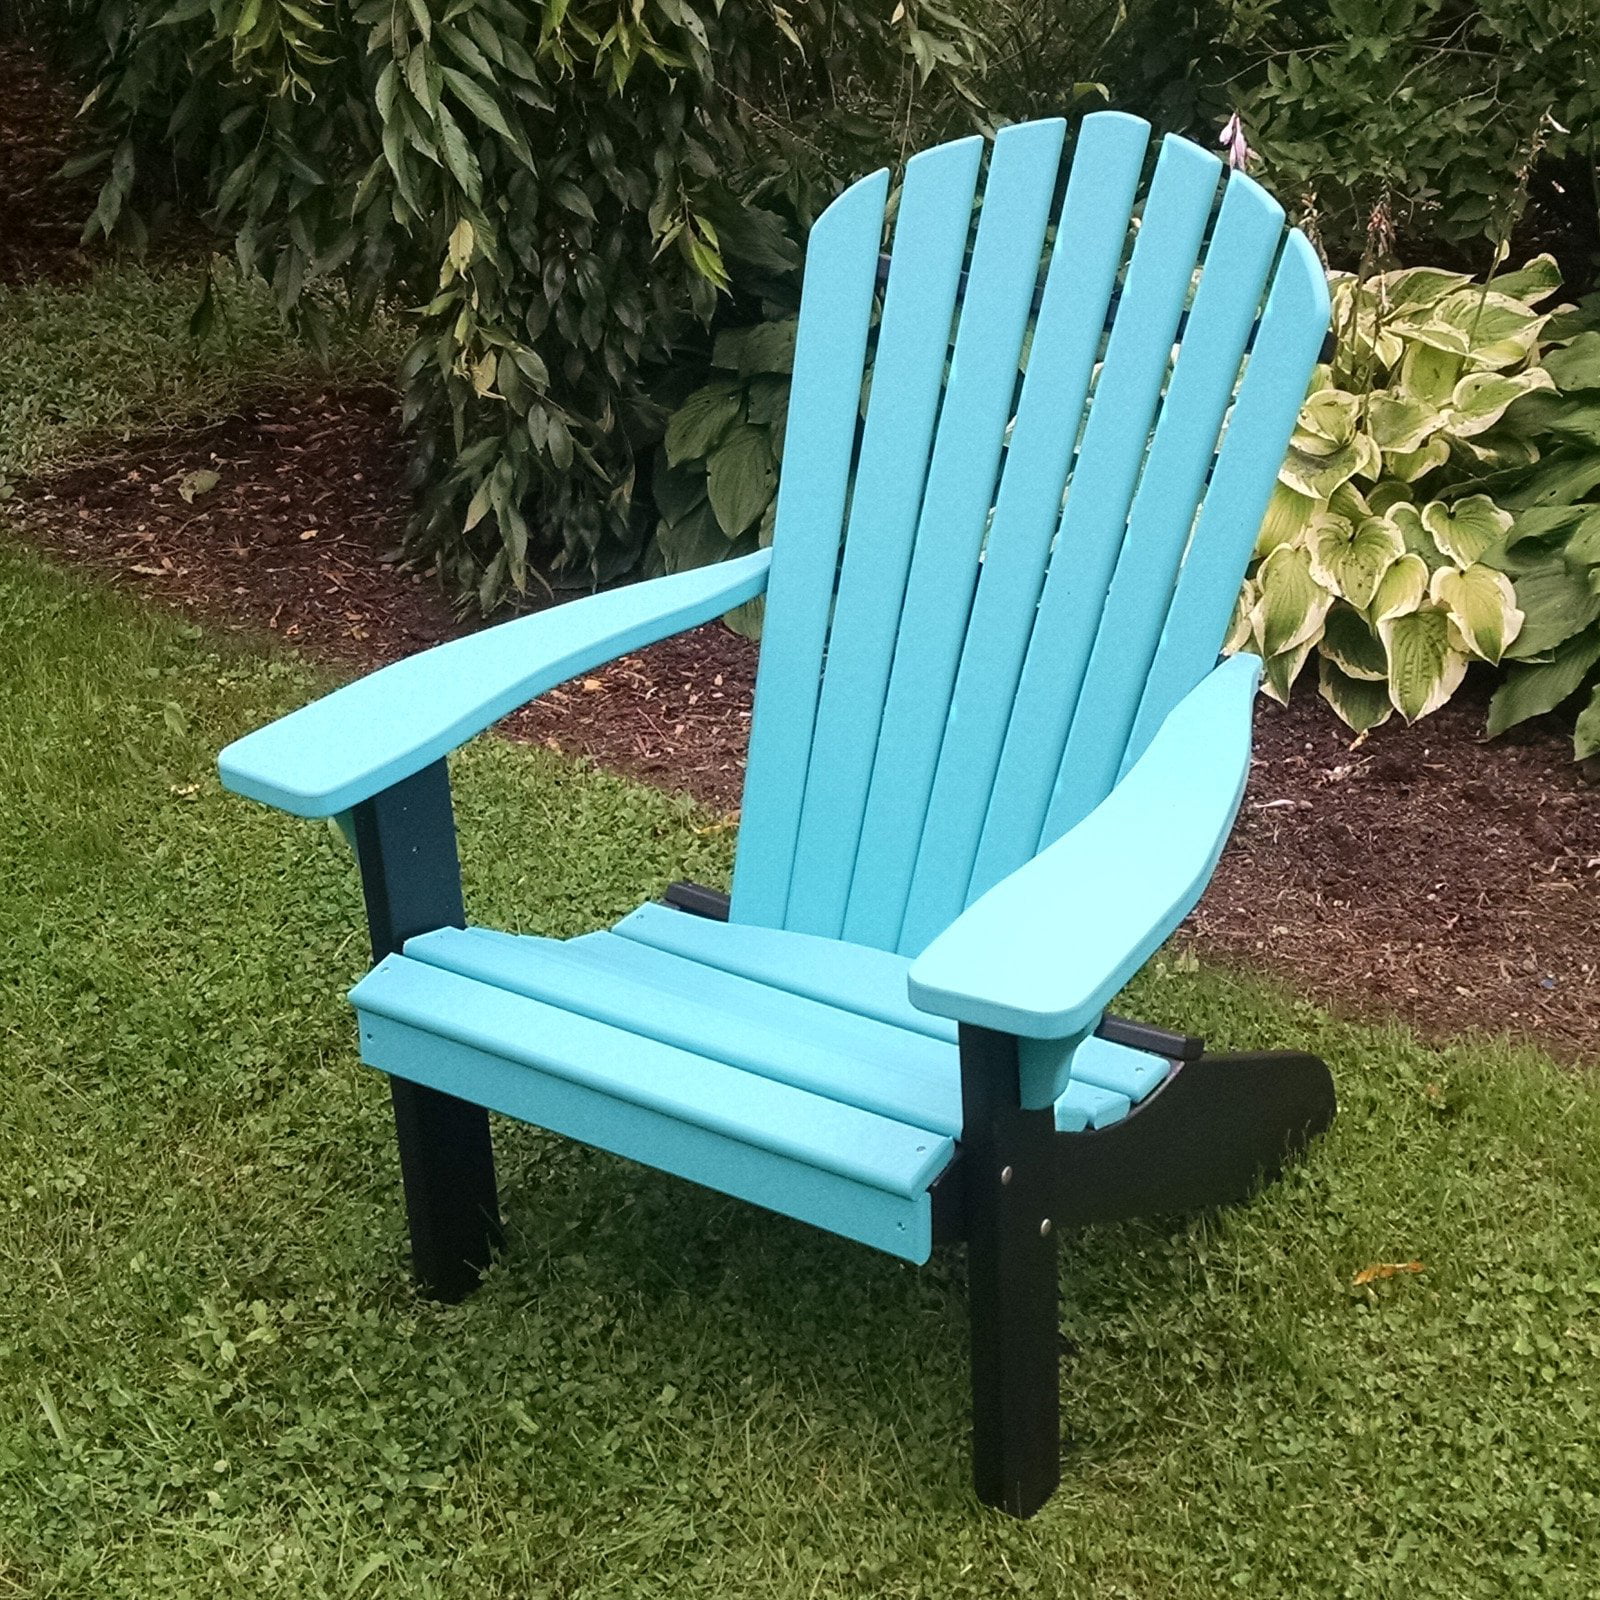 A & L Recycled Plastic TwoTone Fanback Adirondack Chair